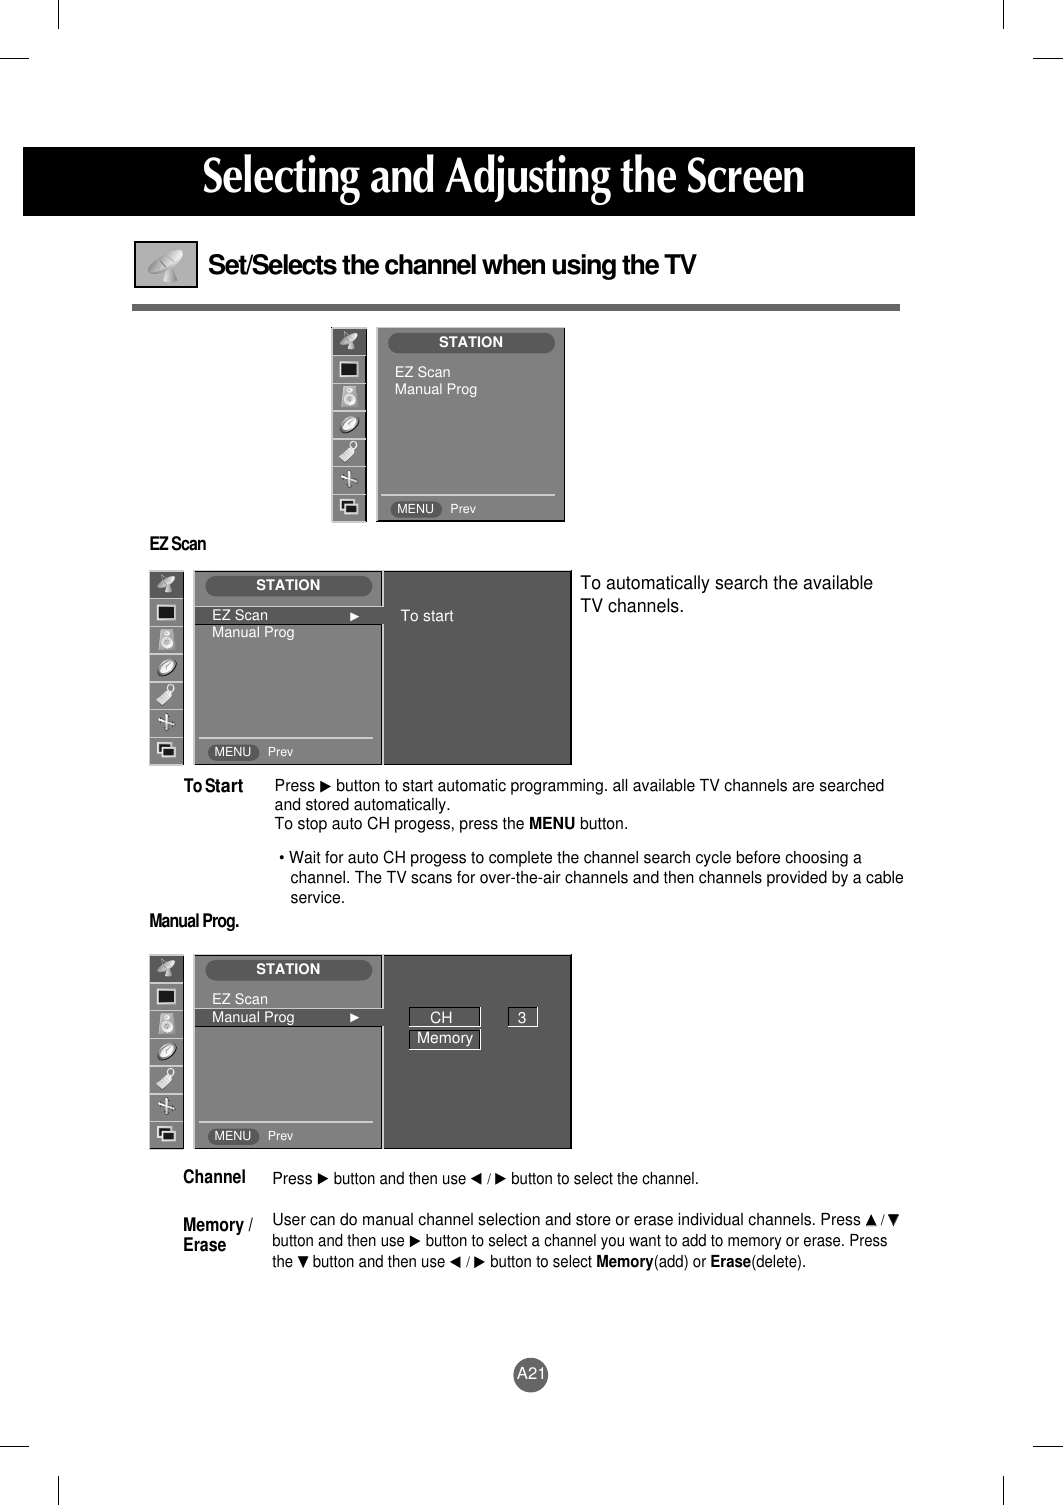 A21Selecting and Adjusting the ScreenSet/Selects the channel when using the TVEZ ScanManual Prog.Press G button to start automatic programming. all available TV channels are searchedand stored automatically. To stop auto CH progess, press the MENU button. • Wait for auto CH progess to complete the channel search cycle before choosing achannel. The TV scans for over-the-air channels and then channels provided by a cableservice.To StartTo automatically search the available TV channels.PressG button and then use F / G button to select the channel.User can do manual channel selection and store or erase individual channels. Press DD  / EEbutton and then use G button to select a channel you want to add to memory or erase. Pressthe E button and then use F / G button to select Memory(add) or Erase(delete).Channel Memory /EraseSTATIONMENU PrevEZ ScanManual ProgSTATIONMENU PrevEZ Scan GManual Prog To startSTATIONMENU PrevEZ ScanManual Prog GCH               3Memory